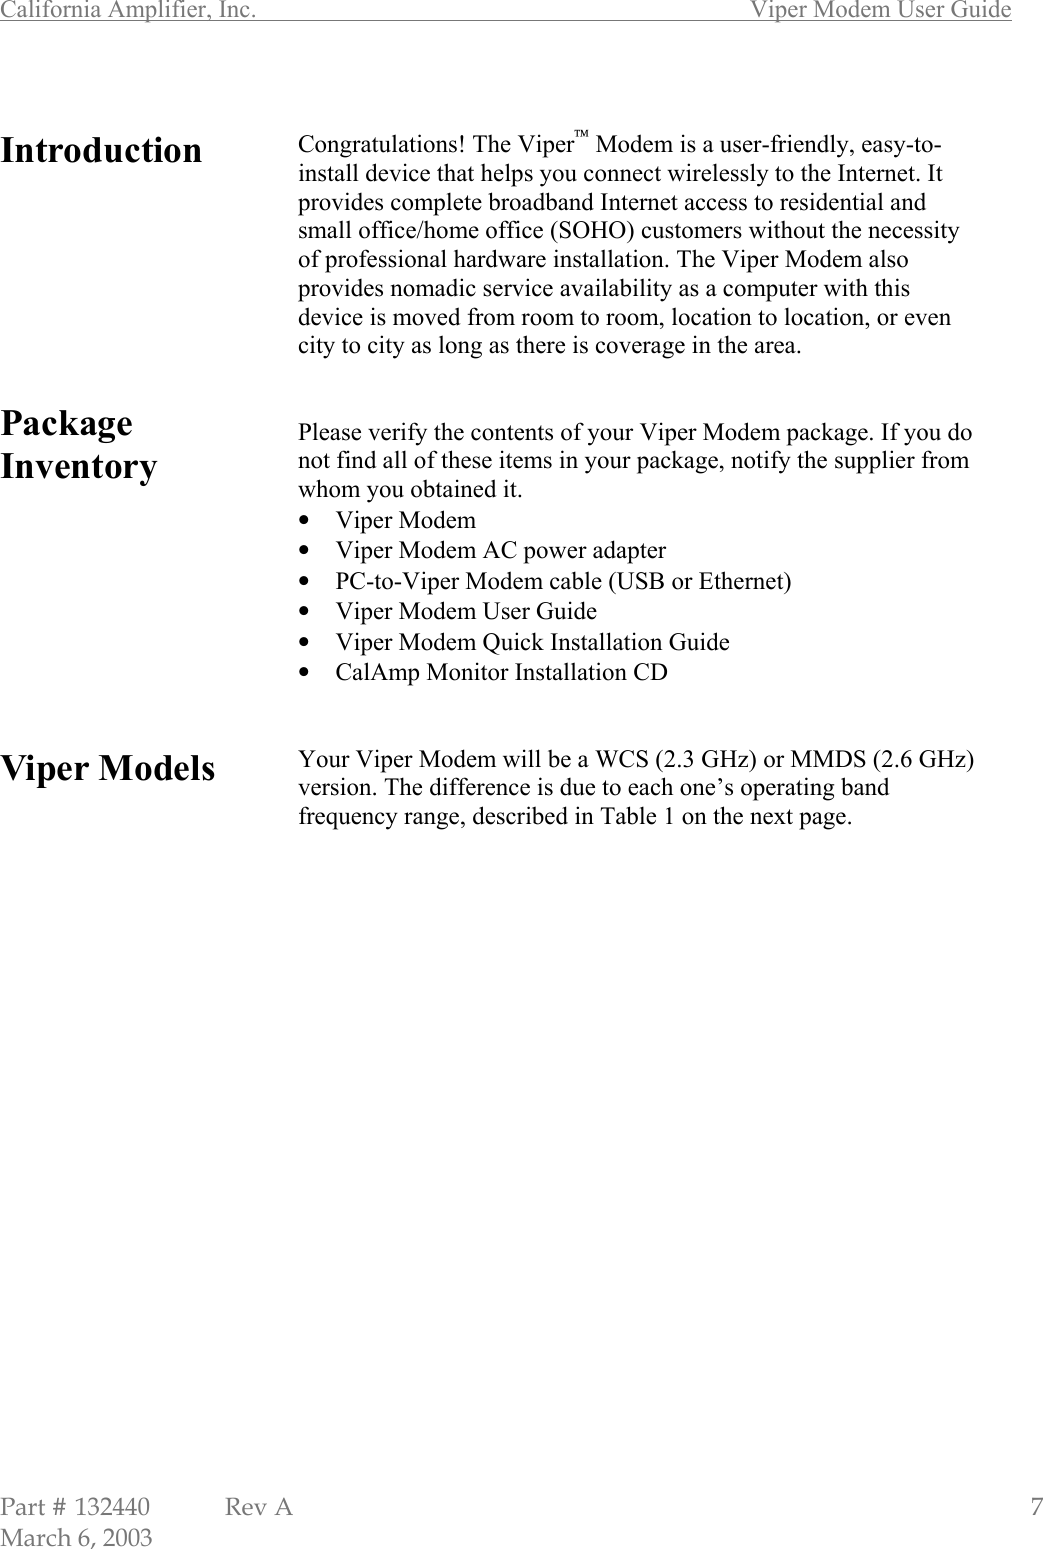 California Amplifier, Inc.       Viper Modem User Guide Part # 132440  Rev A                                                   7 March 6, 2003  Introduction         Package Inventory          Viper Models                        Congratulations! The Viper Modem is a user-friendly, easy-to-install device that helps you connect wirelessly to the Internet. It provides complete broadband Internet access to residential and small office/home office (SOHO) customers without the necessity of professional hardware installation. The Viper Modem also provides nomadic service availability as a computer with this device is moved from room to room, location to location, or even city to city as long as there is coverage in the area.   Please verify the contents of your Viper Modem package. If you do not find all of these items in your package, notify the supplier from whom you obtained it. • Viper Modem • Viper Modem AC power adapter • PC-to-Viper Modem cable (USB or Ethernet) • Viper Modem User Guide • Viper Modem Quick Installation Guide • CalAmp Monitor Installation CD   Your Viper Modem will be a WCS (2.3 GHz) or MMDS (2.6 GHz) version. The difference is due to each one’s operating band frequency range, described in Table 1 on the next page.                      